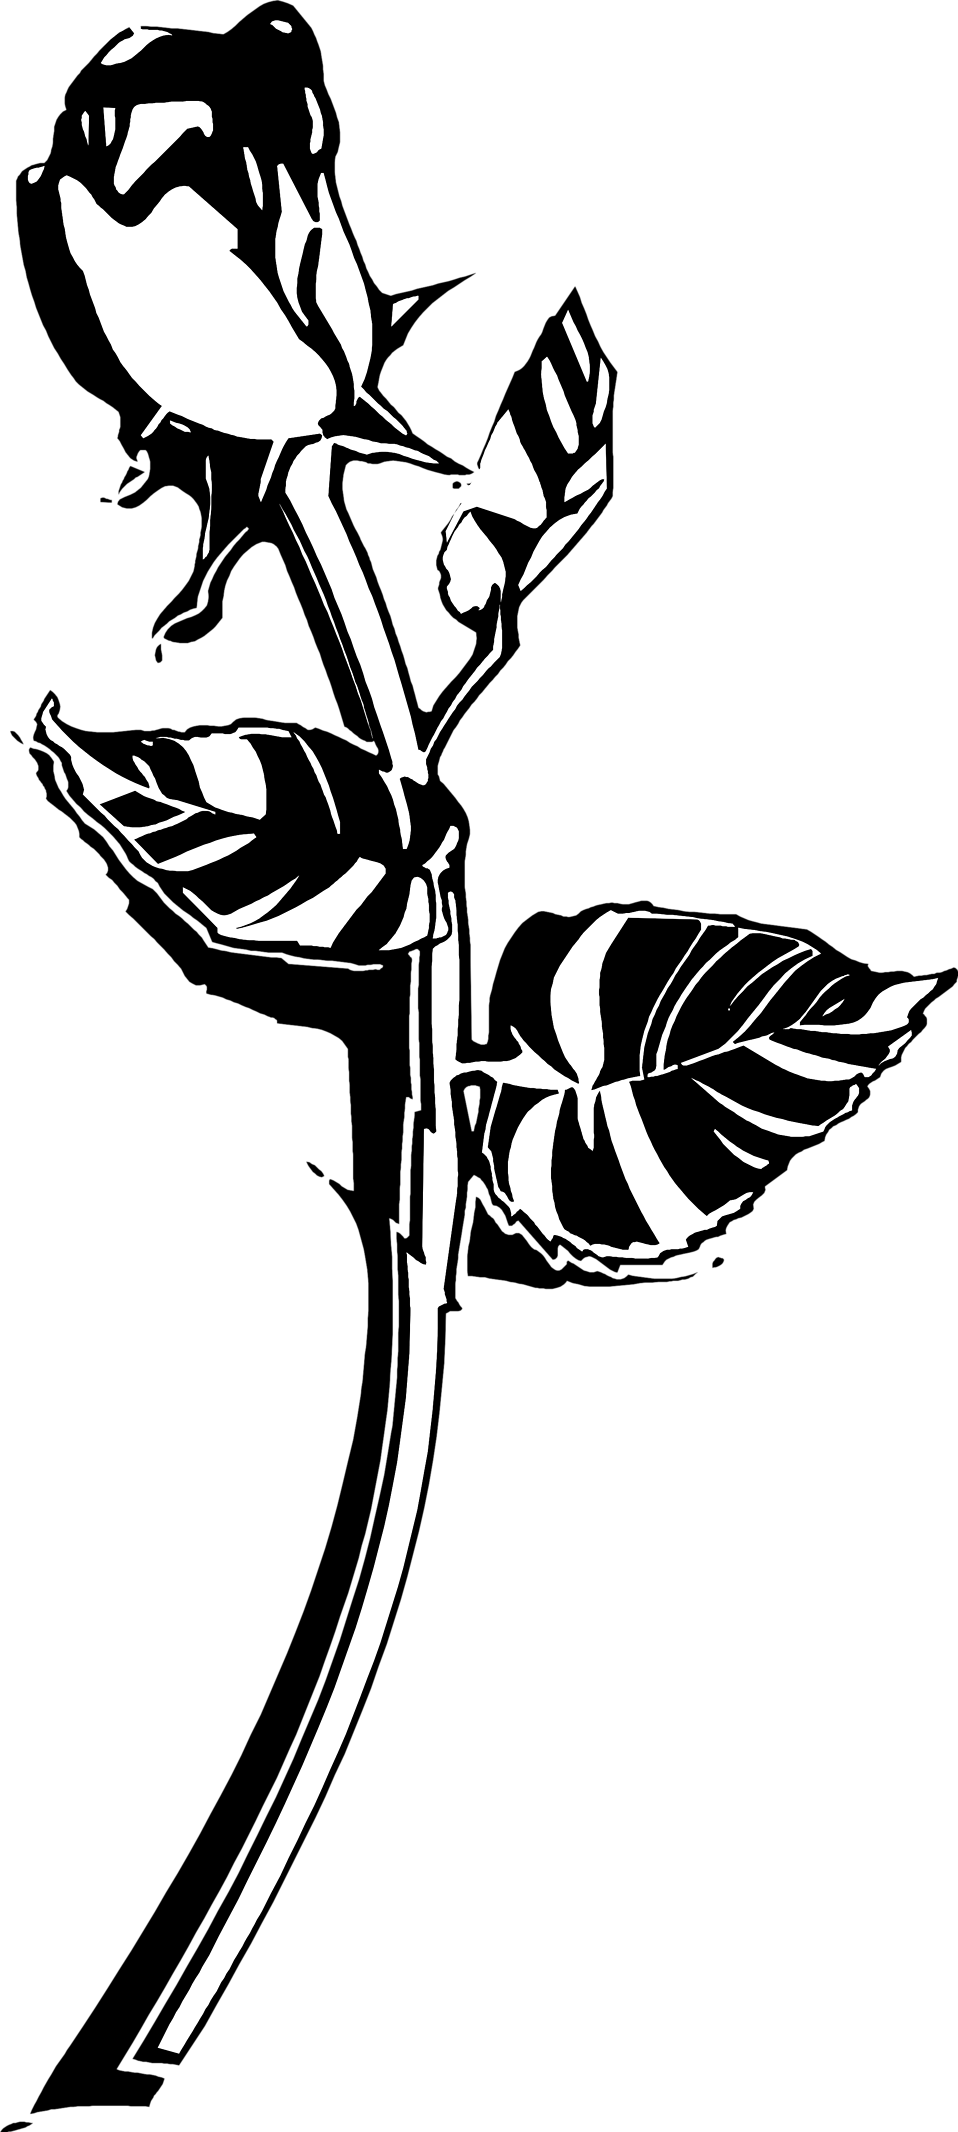 Rose free stock photo. Clipart roses black and white